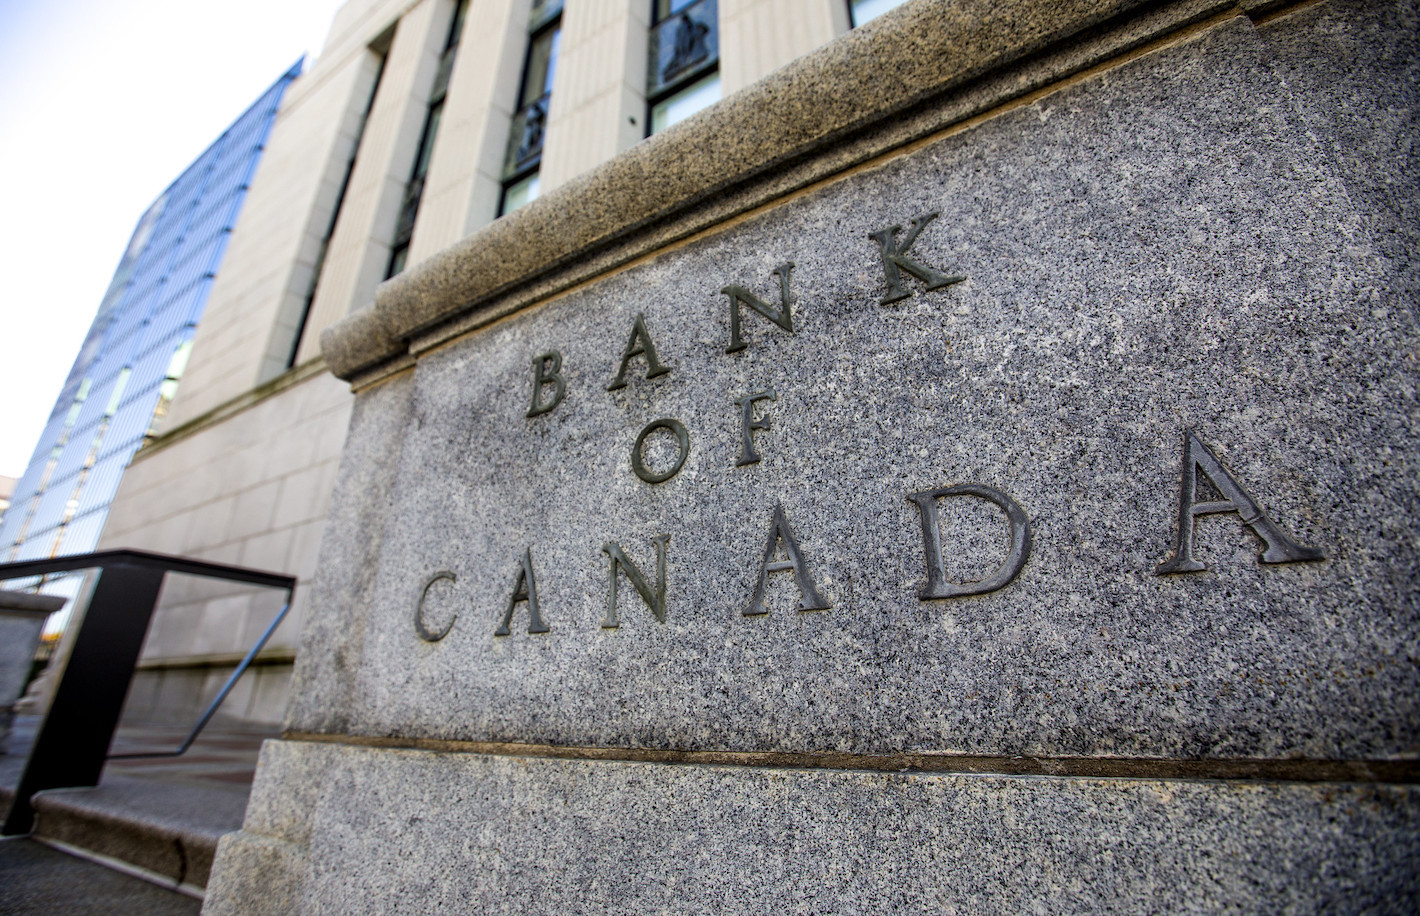 Canada’s-central-bank-is-serious-about-designing-a-cbdc,-job-posting-reveals